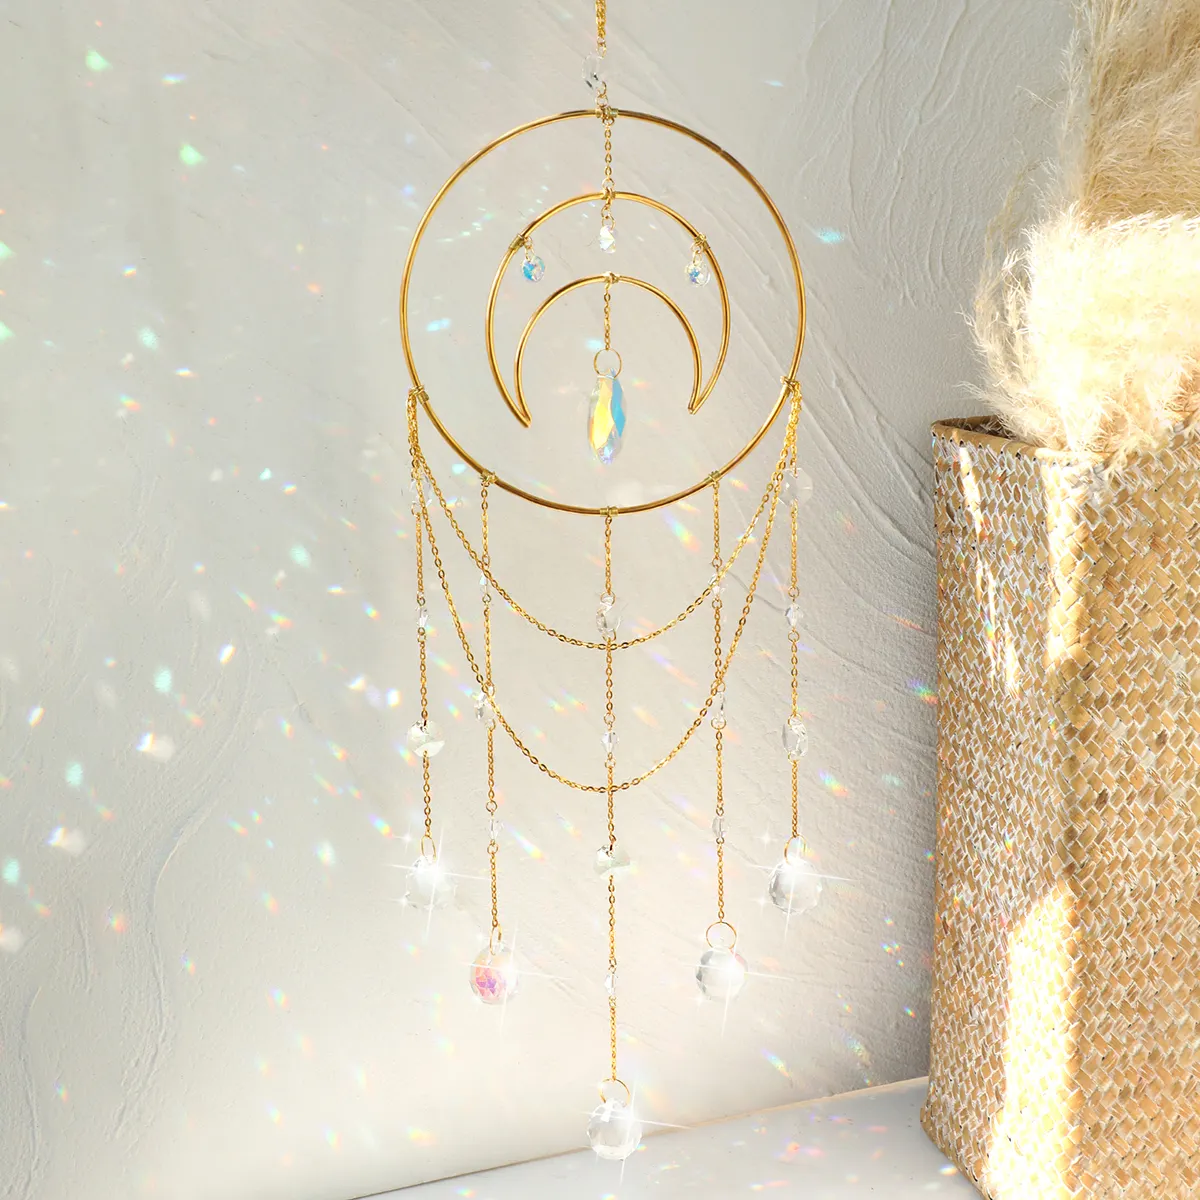 Crystal Ball Sun Catcher Large Dream Catcher Wind Chimes Crystal Glass Chandelier Wall Hanging For Window Garden Room Decor Gift